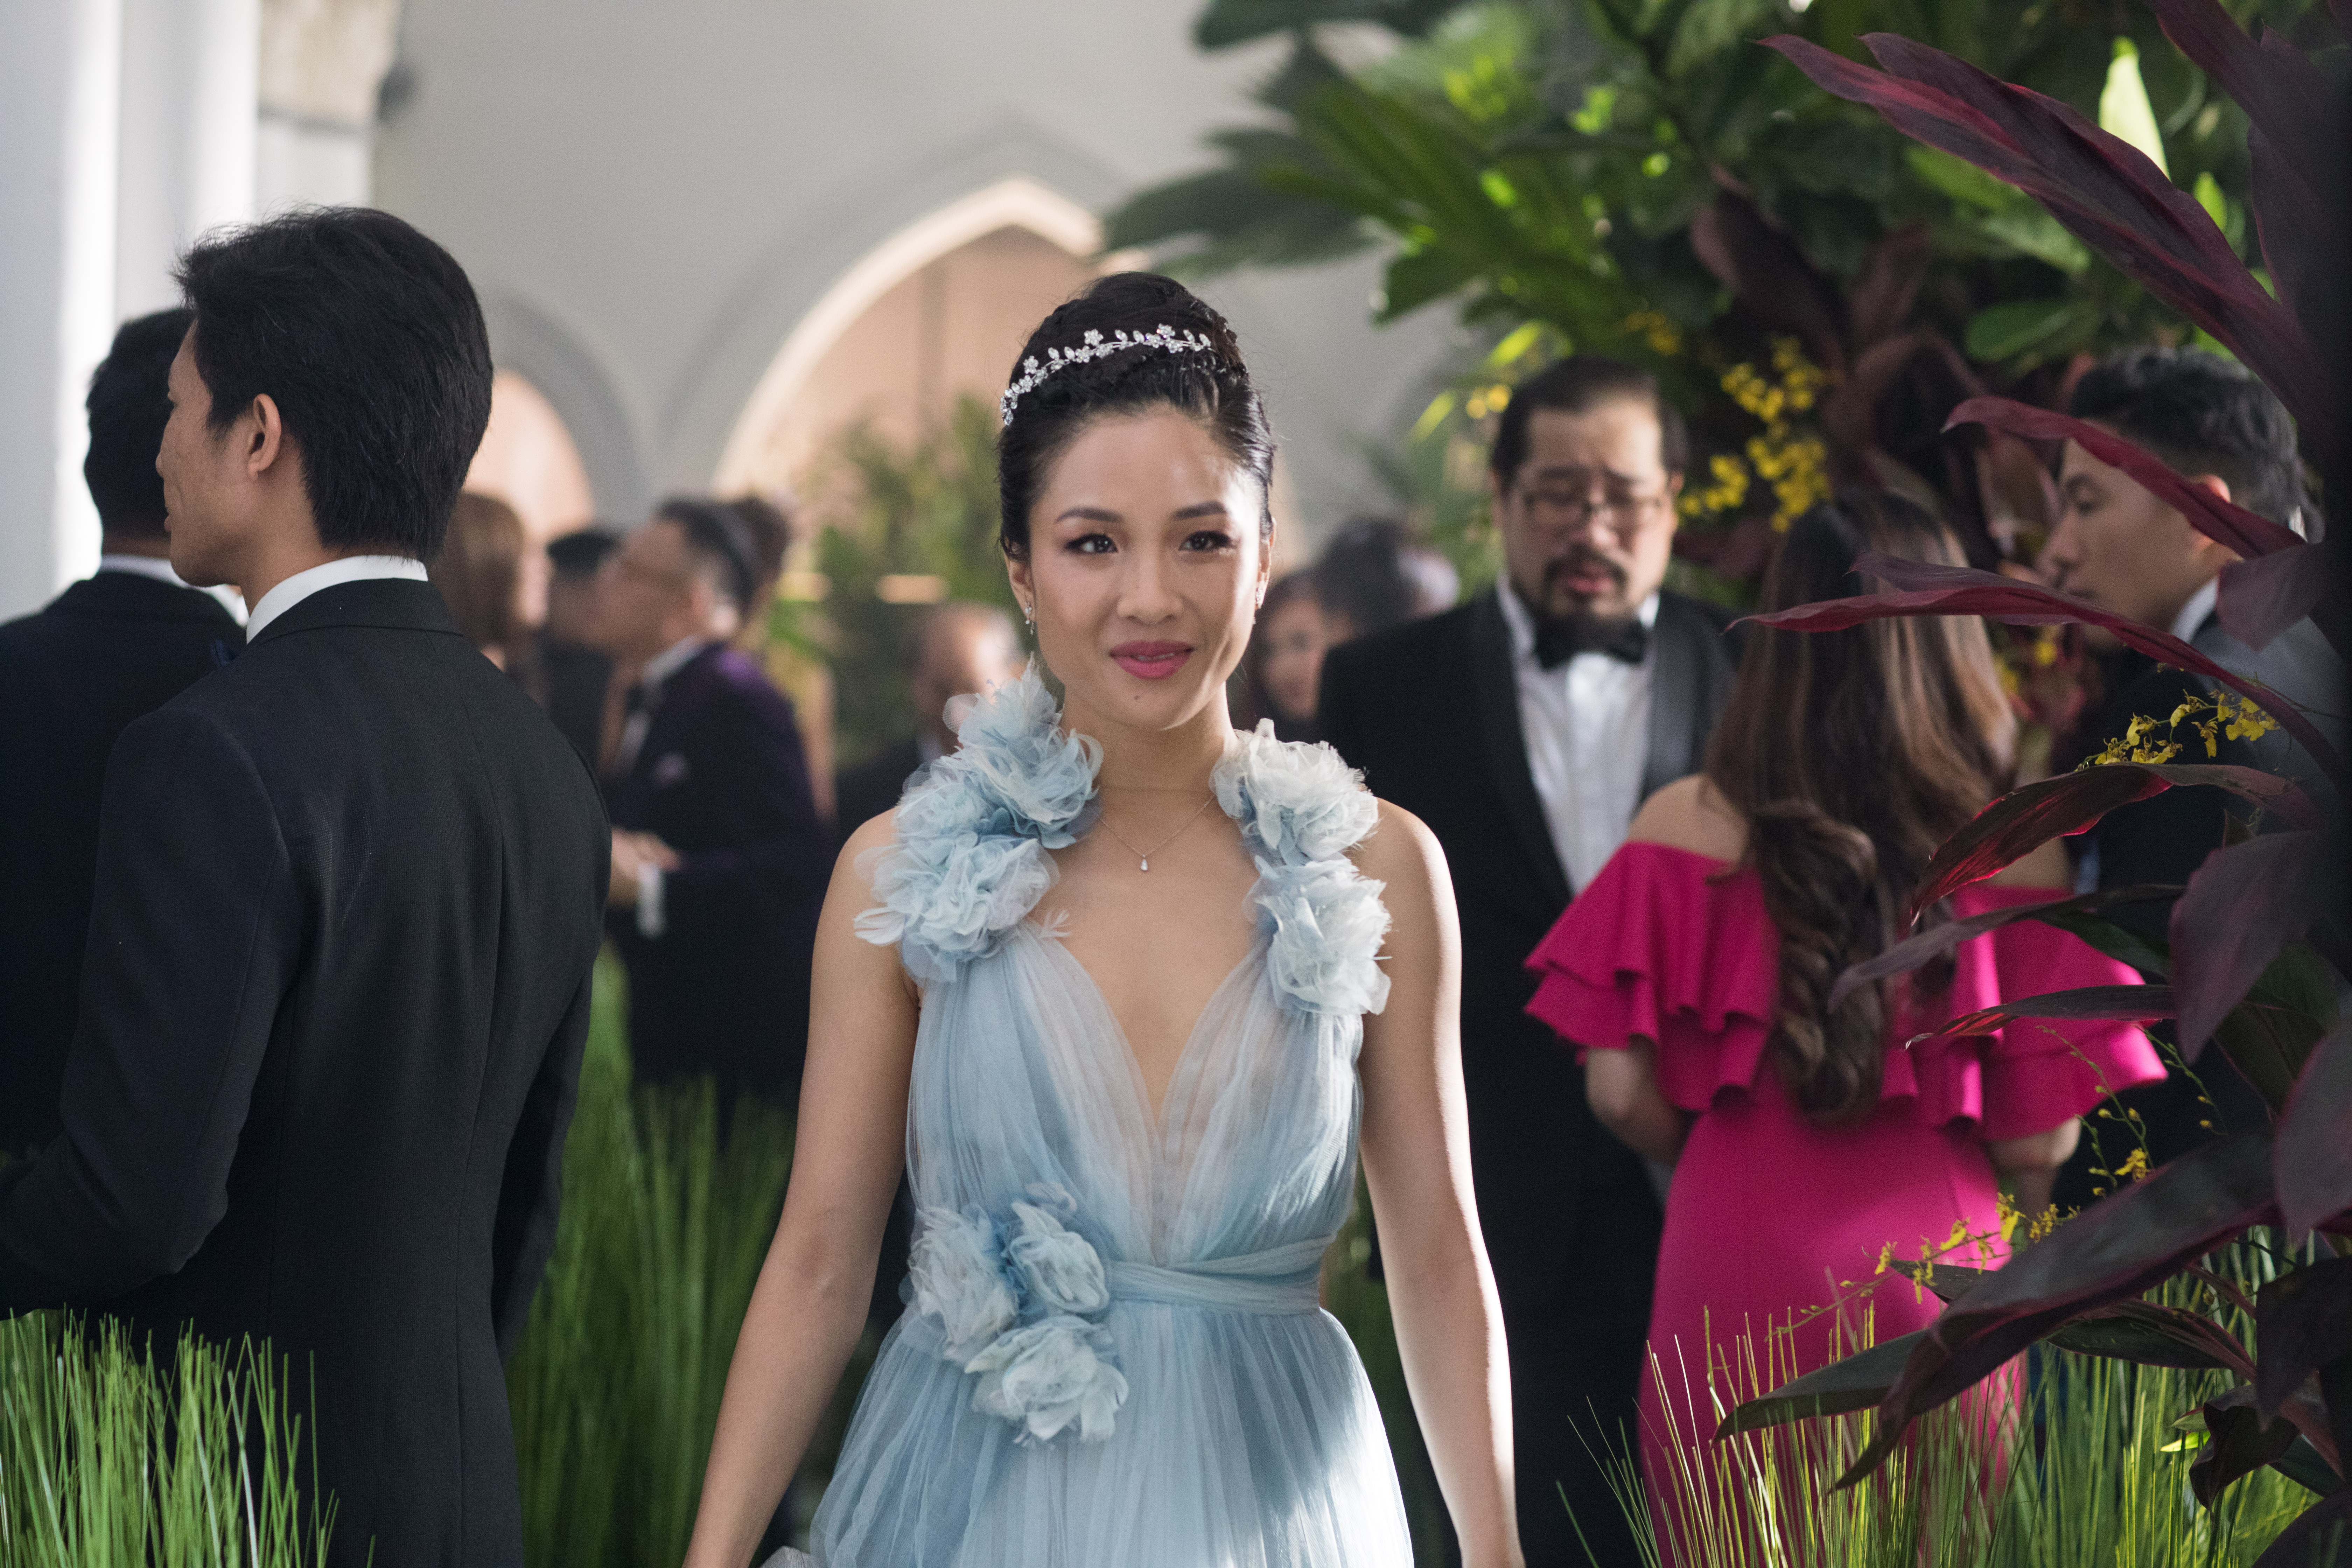 Caption: CONSTANCE WU as Rachel in Warner Bros. Pictures' and SK Global Entertainment's contemporary romantic comedy "CRAZY RICH ASIANS," a Warner Bros. Pictures release. Photo Credit: Sanja Bucko